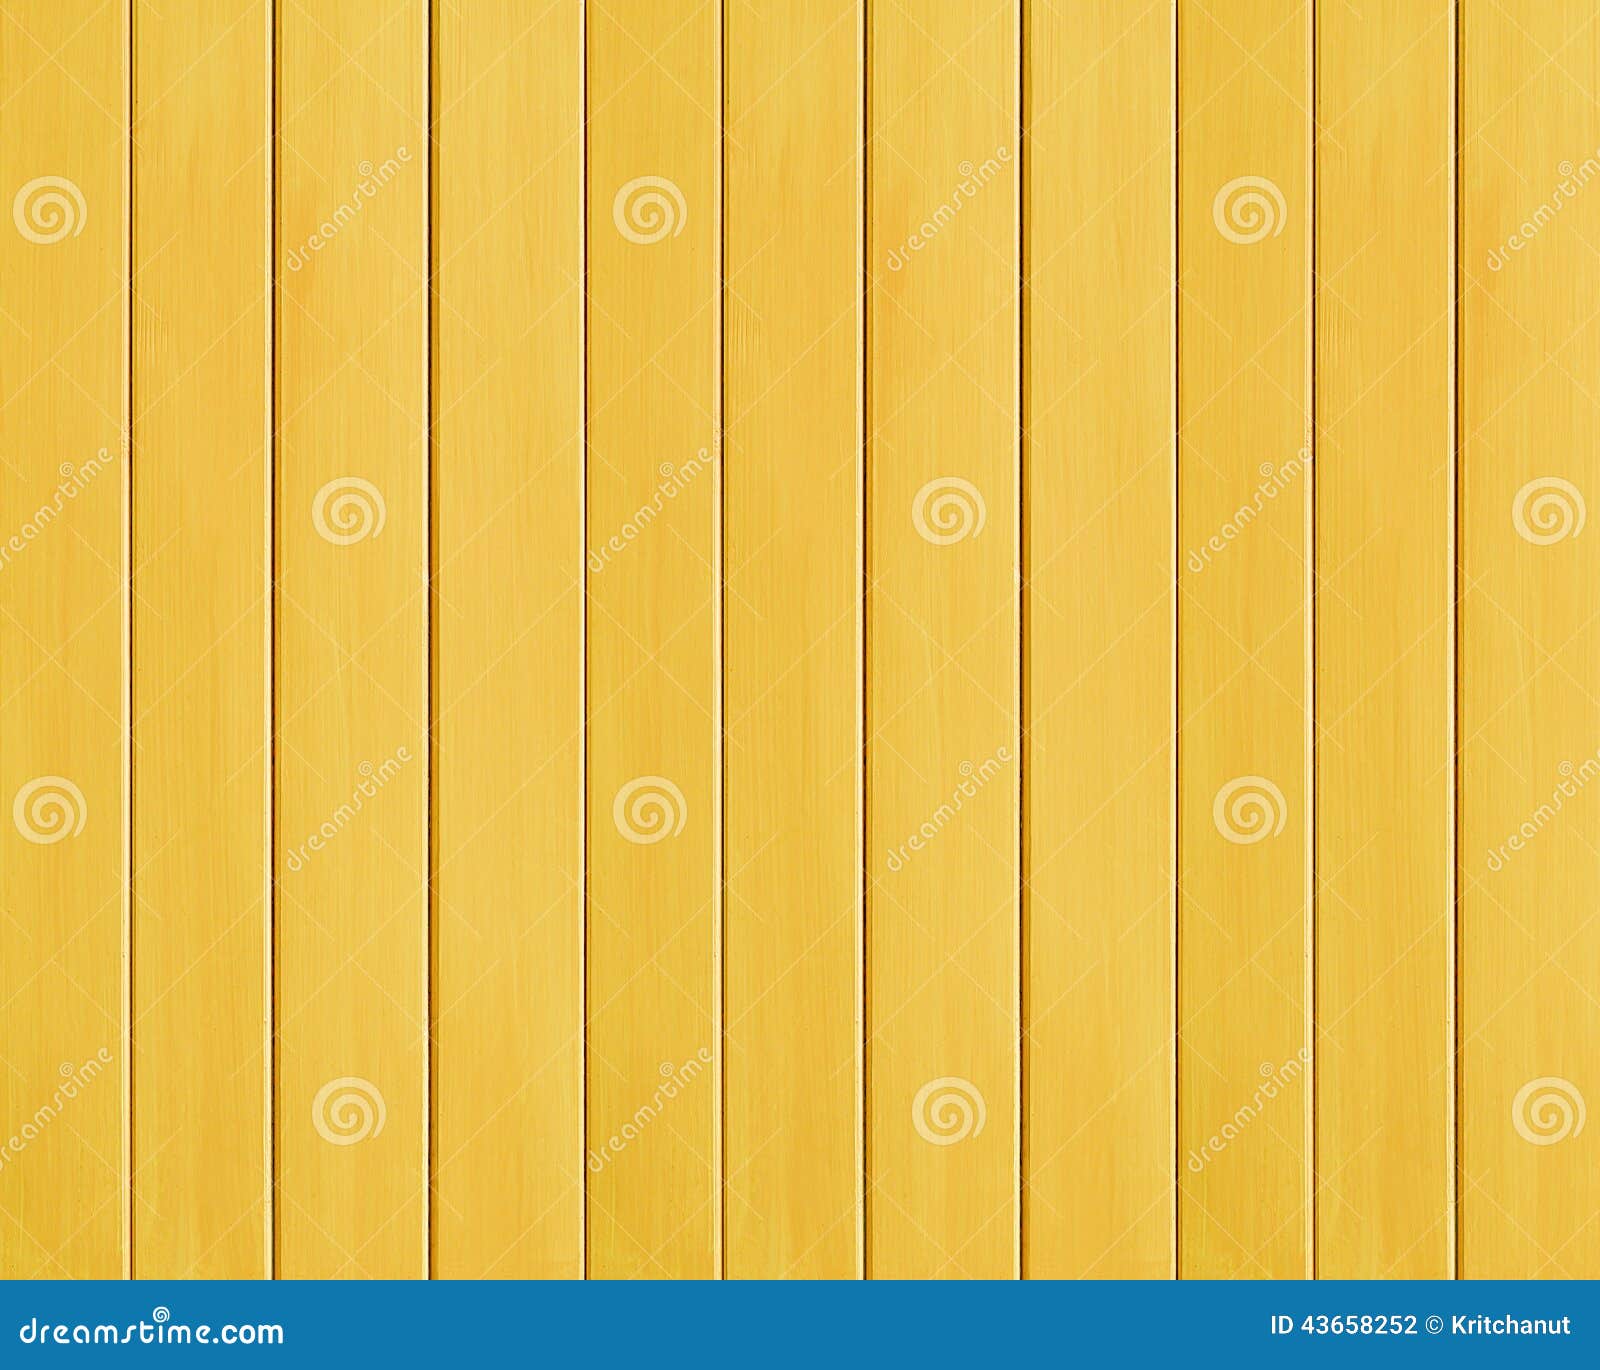 Download 873 919 Yellow Wood Background Photos Free Royalty Free Stock Photos From Dreamstime Yellowimages Mockups